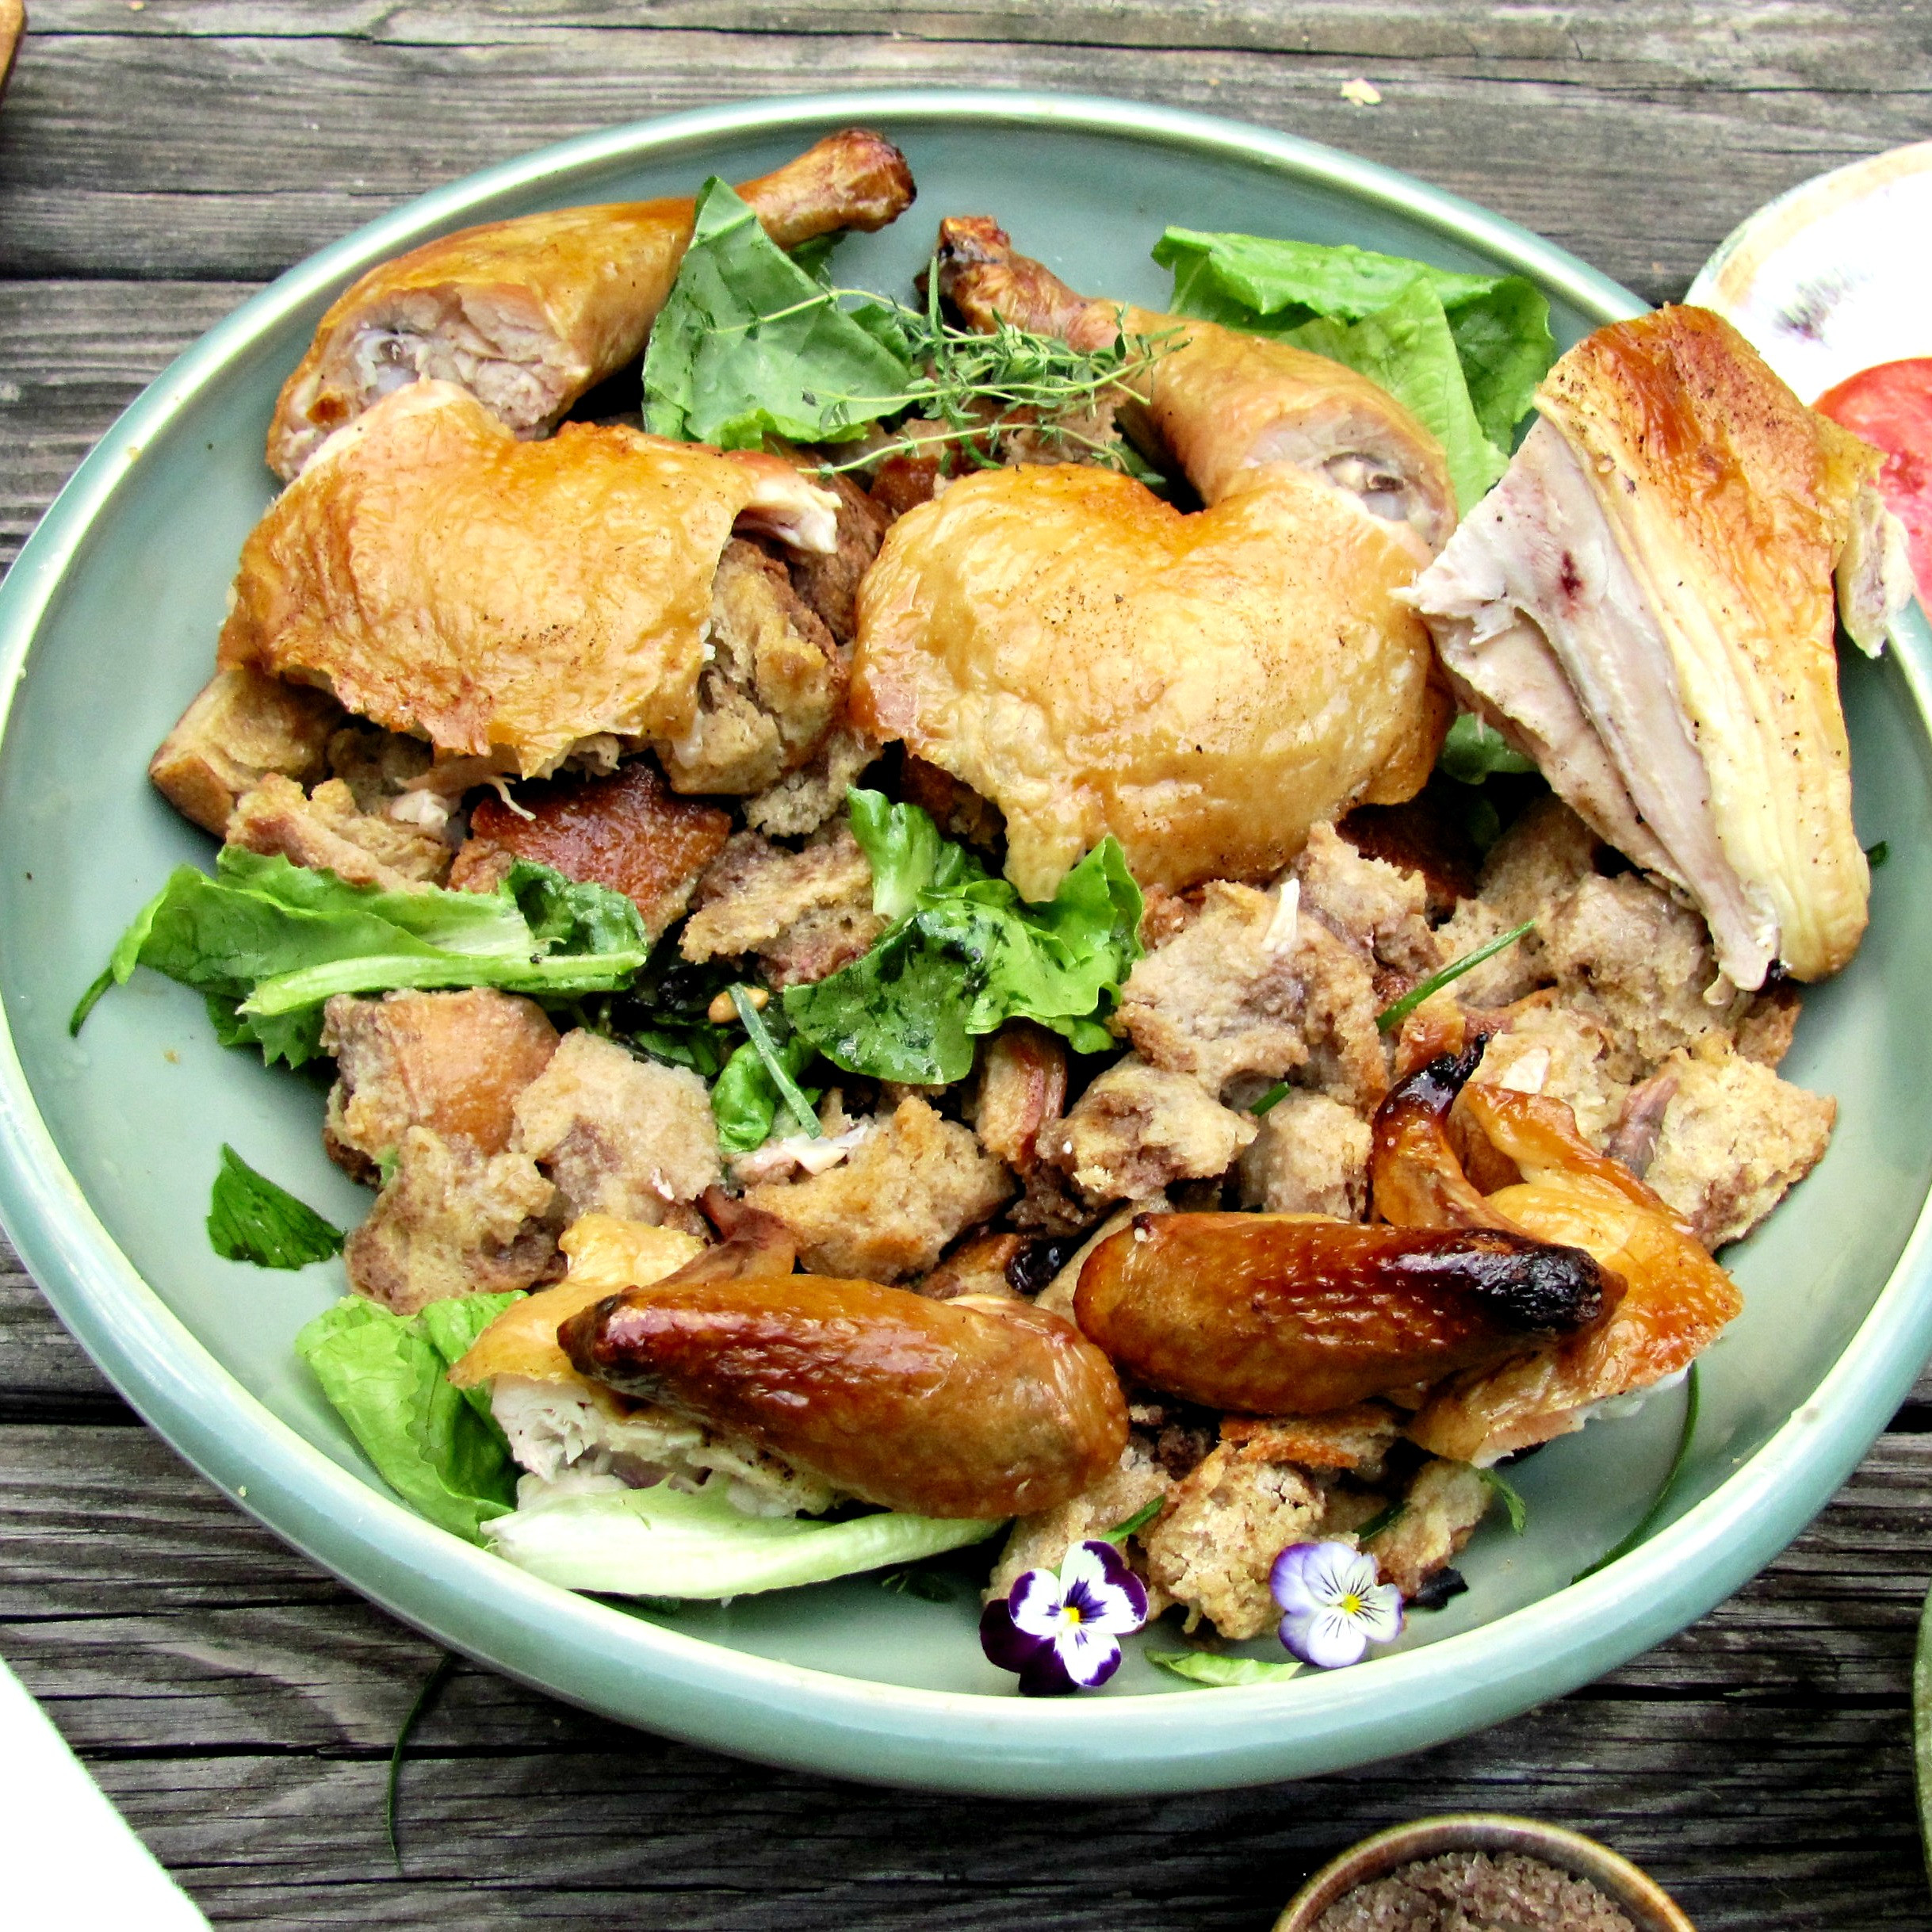 Roasted Chicken Salad Inspirational Wood Roasted Chicken with Bread Salad